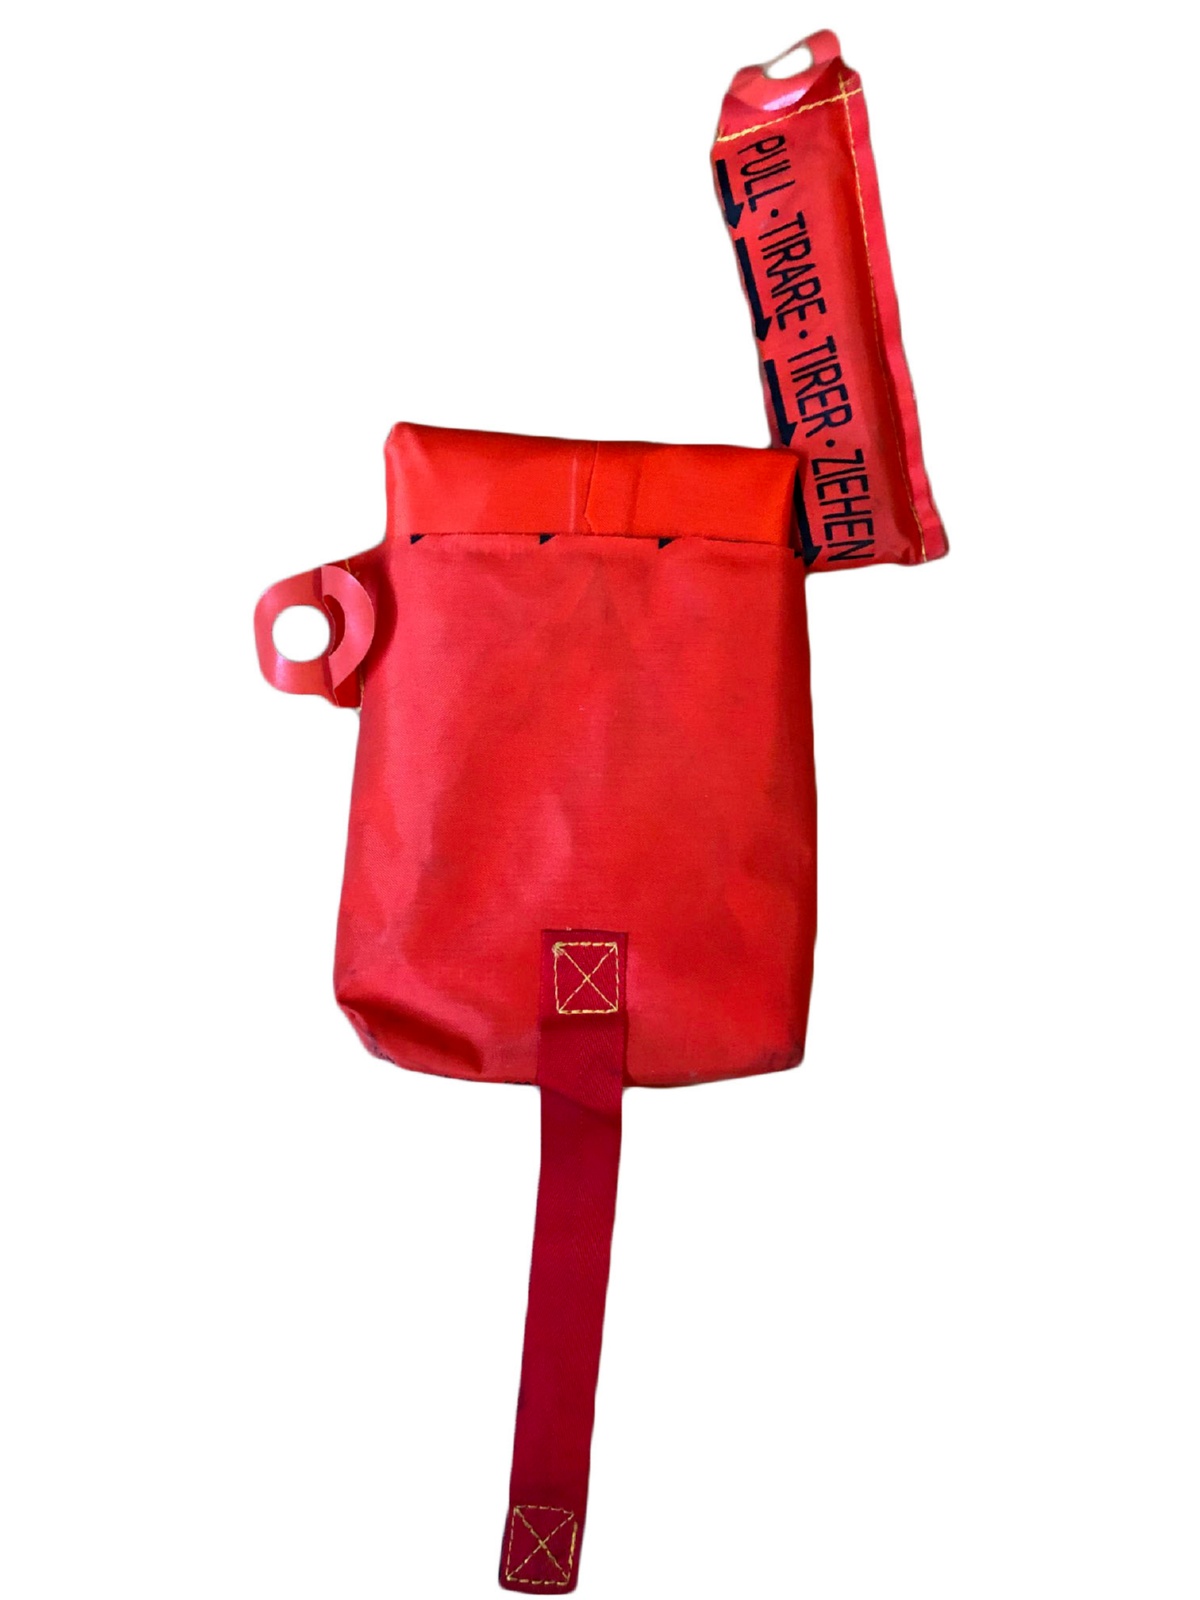 Red Life Jacket Front Wrapped Up 2